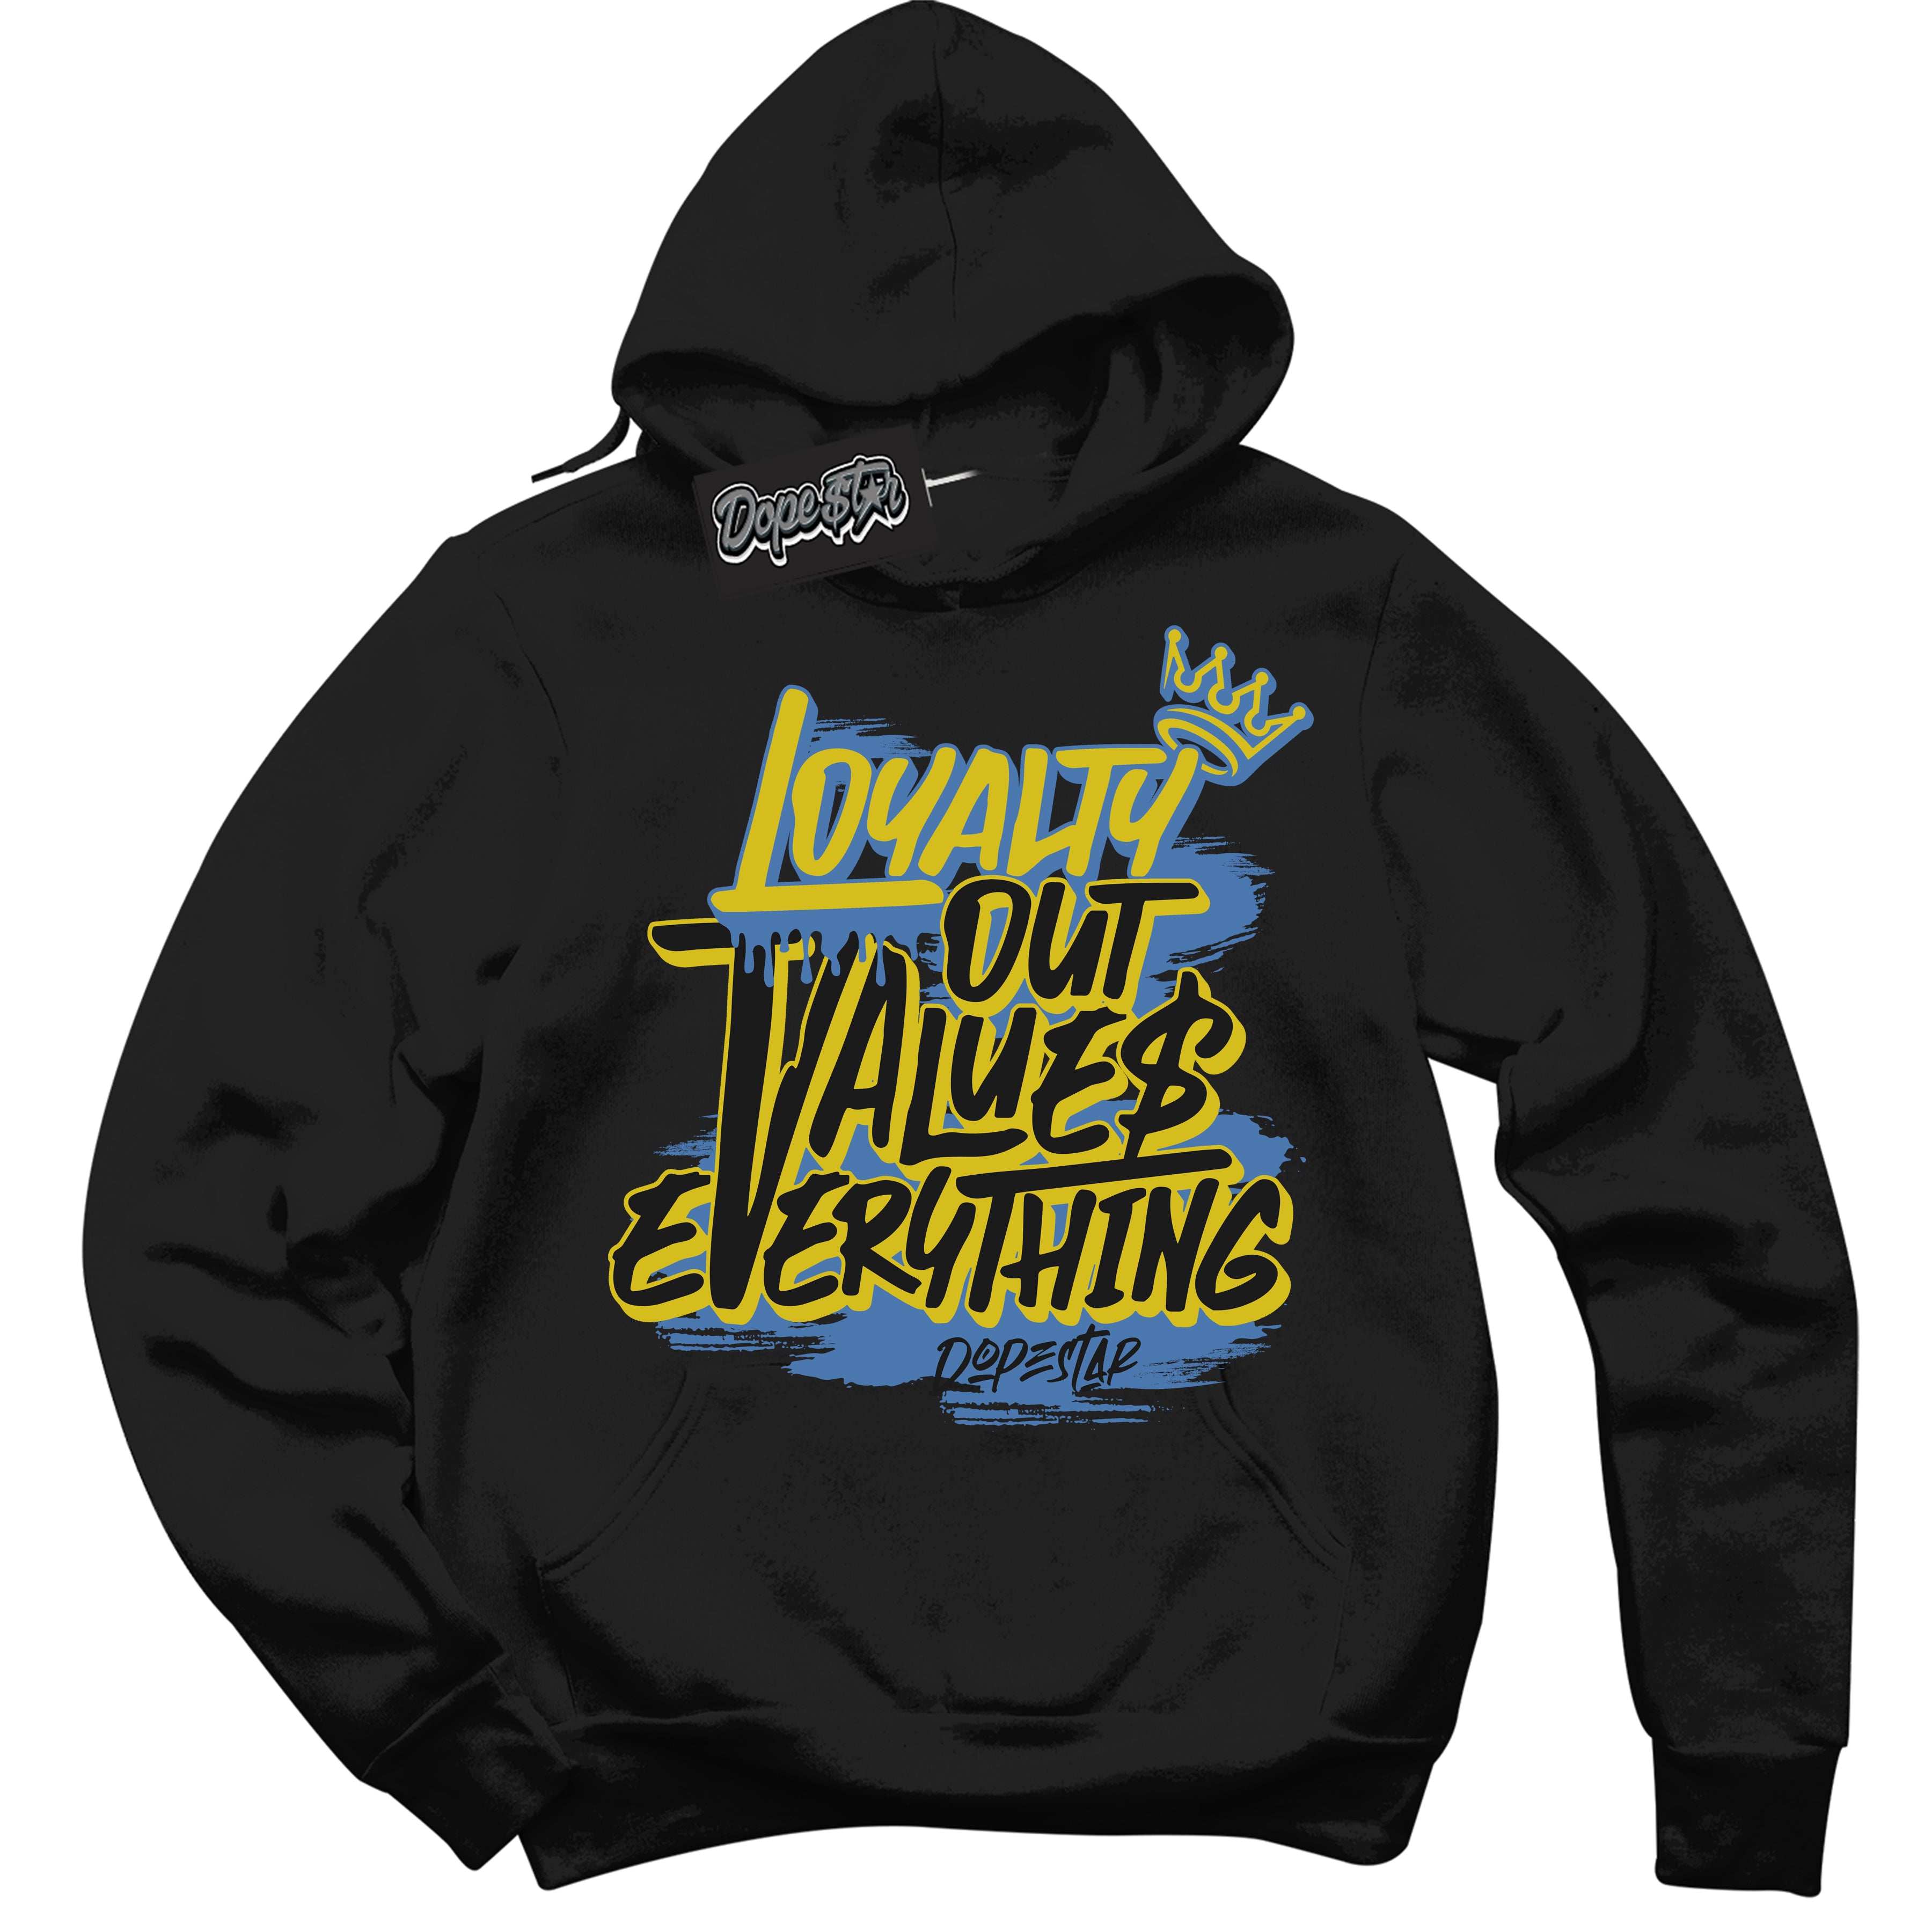 Cool Black Hoodie with “ Loyalty Out Values Everything ”  design that Perfectly Matches  Pro x Powerpuff Girls Bubbles Sneakers.